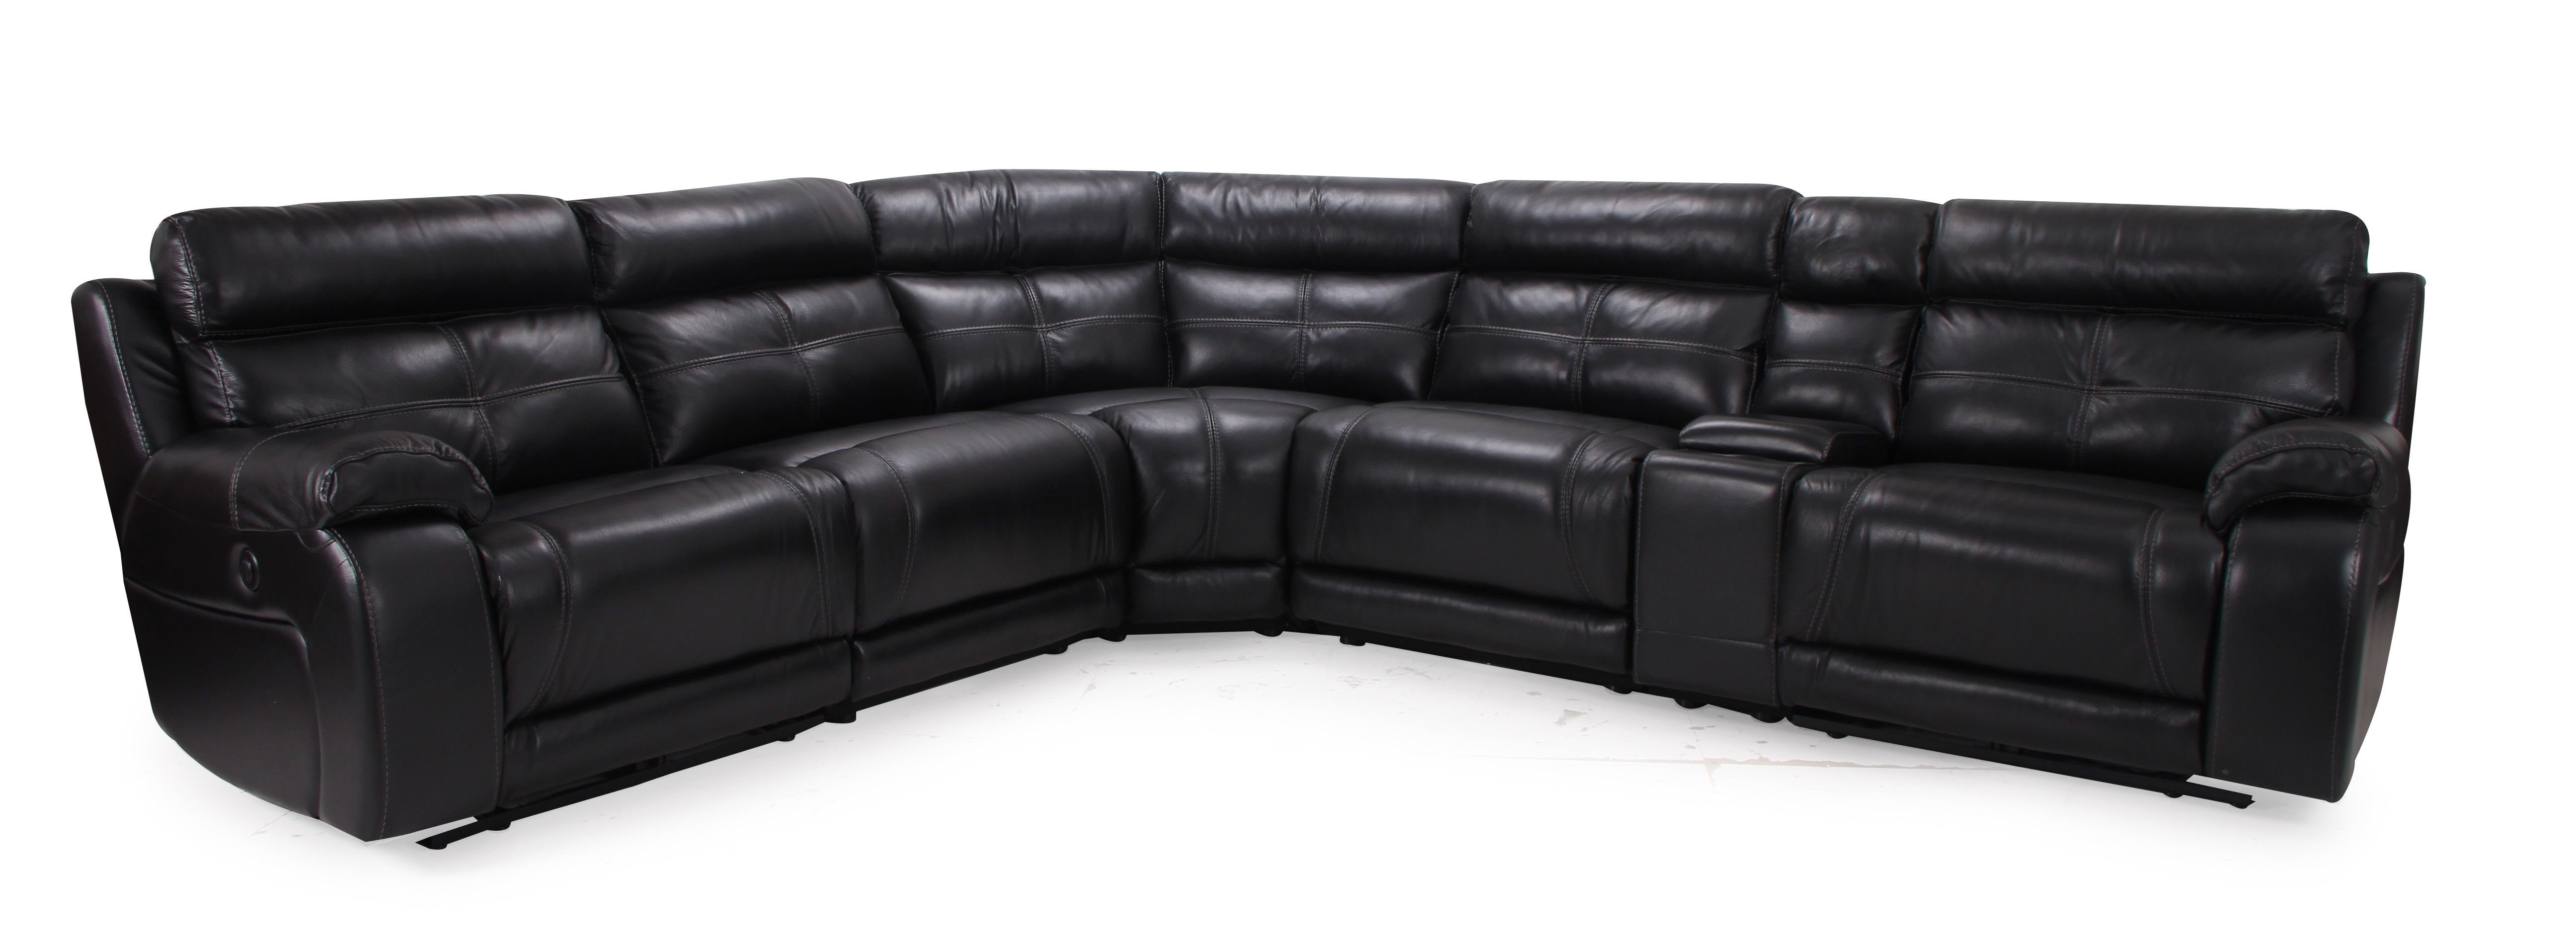 Watson's For Latest Grand Rapids Mi Sectional Sofas (View 6 of 15)